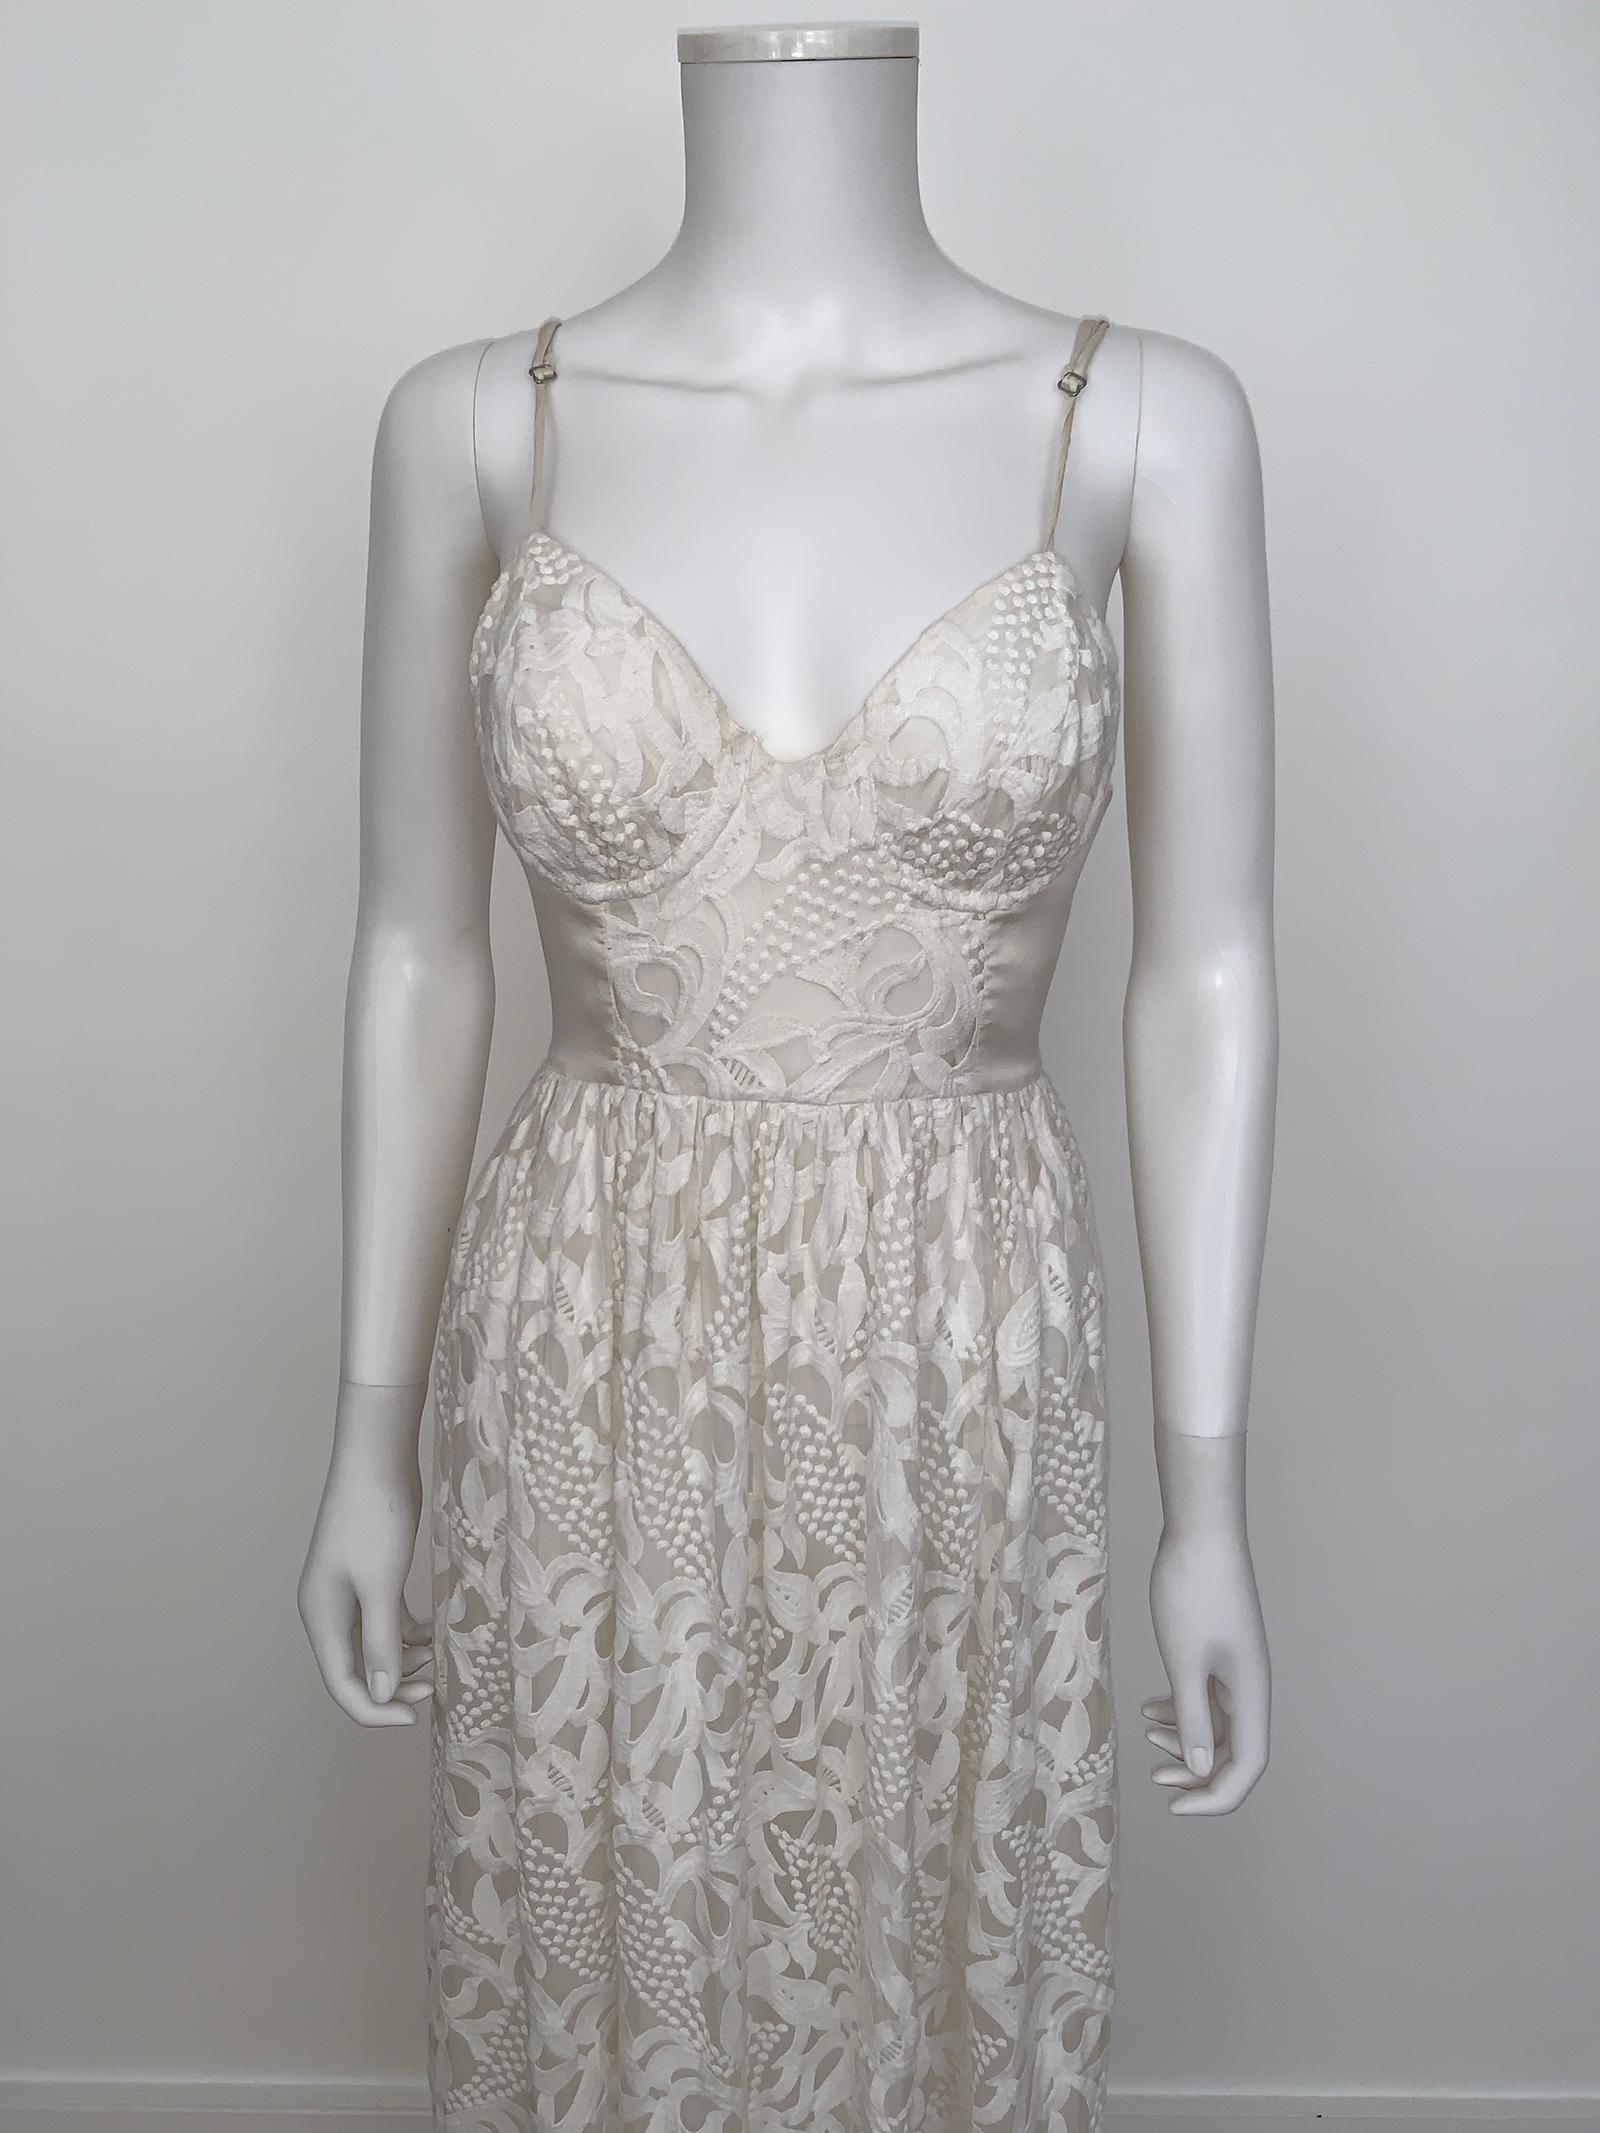 Vintage dress Zimmerman 
- Sleeveless and long length 
-  Open back dress
- Full embroidered dress 
- The to of the dress is like a bra fitting like a size Small 
- Fitting is very flattering
- Size Small 
- Very good condition 